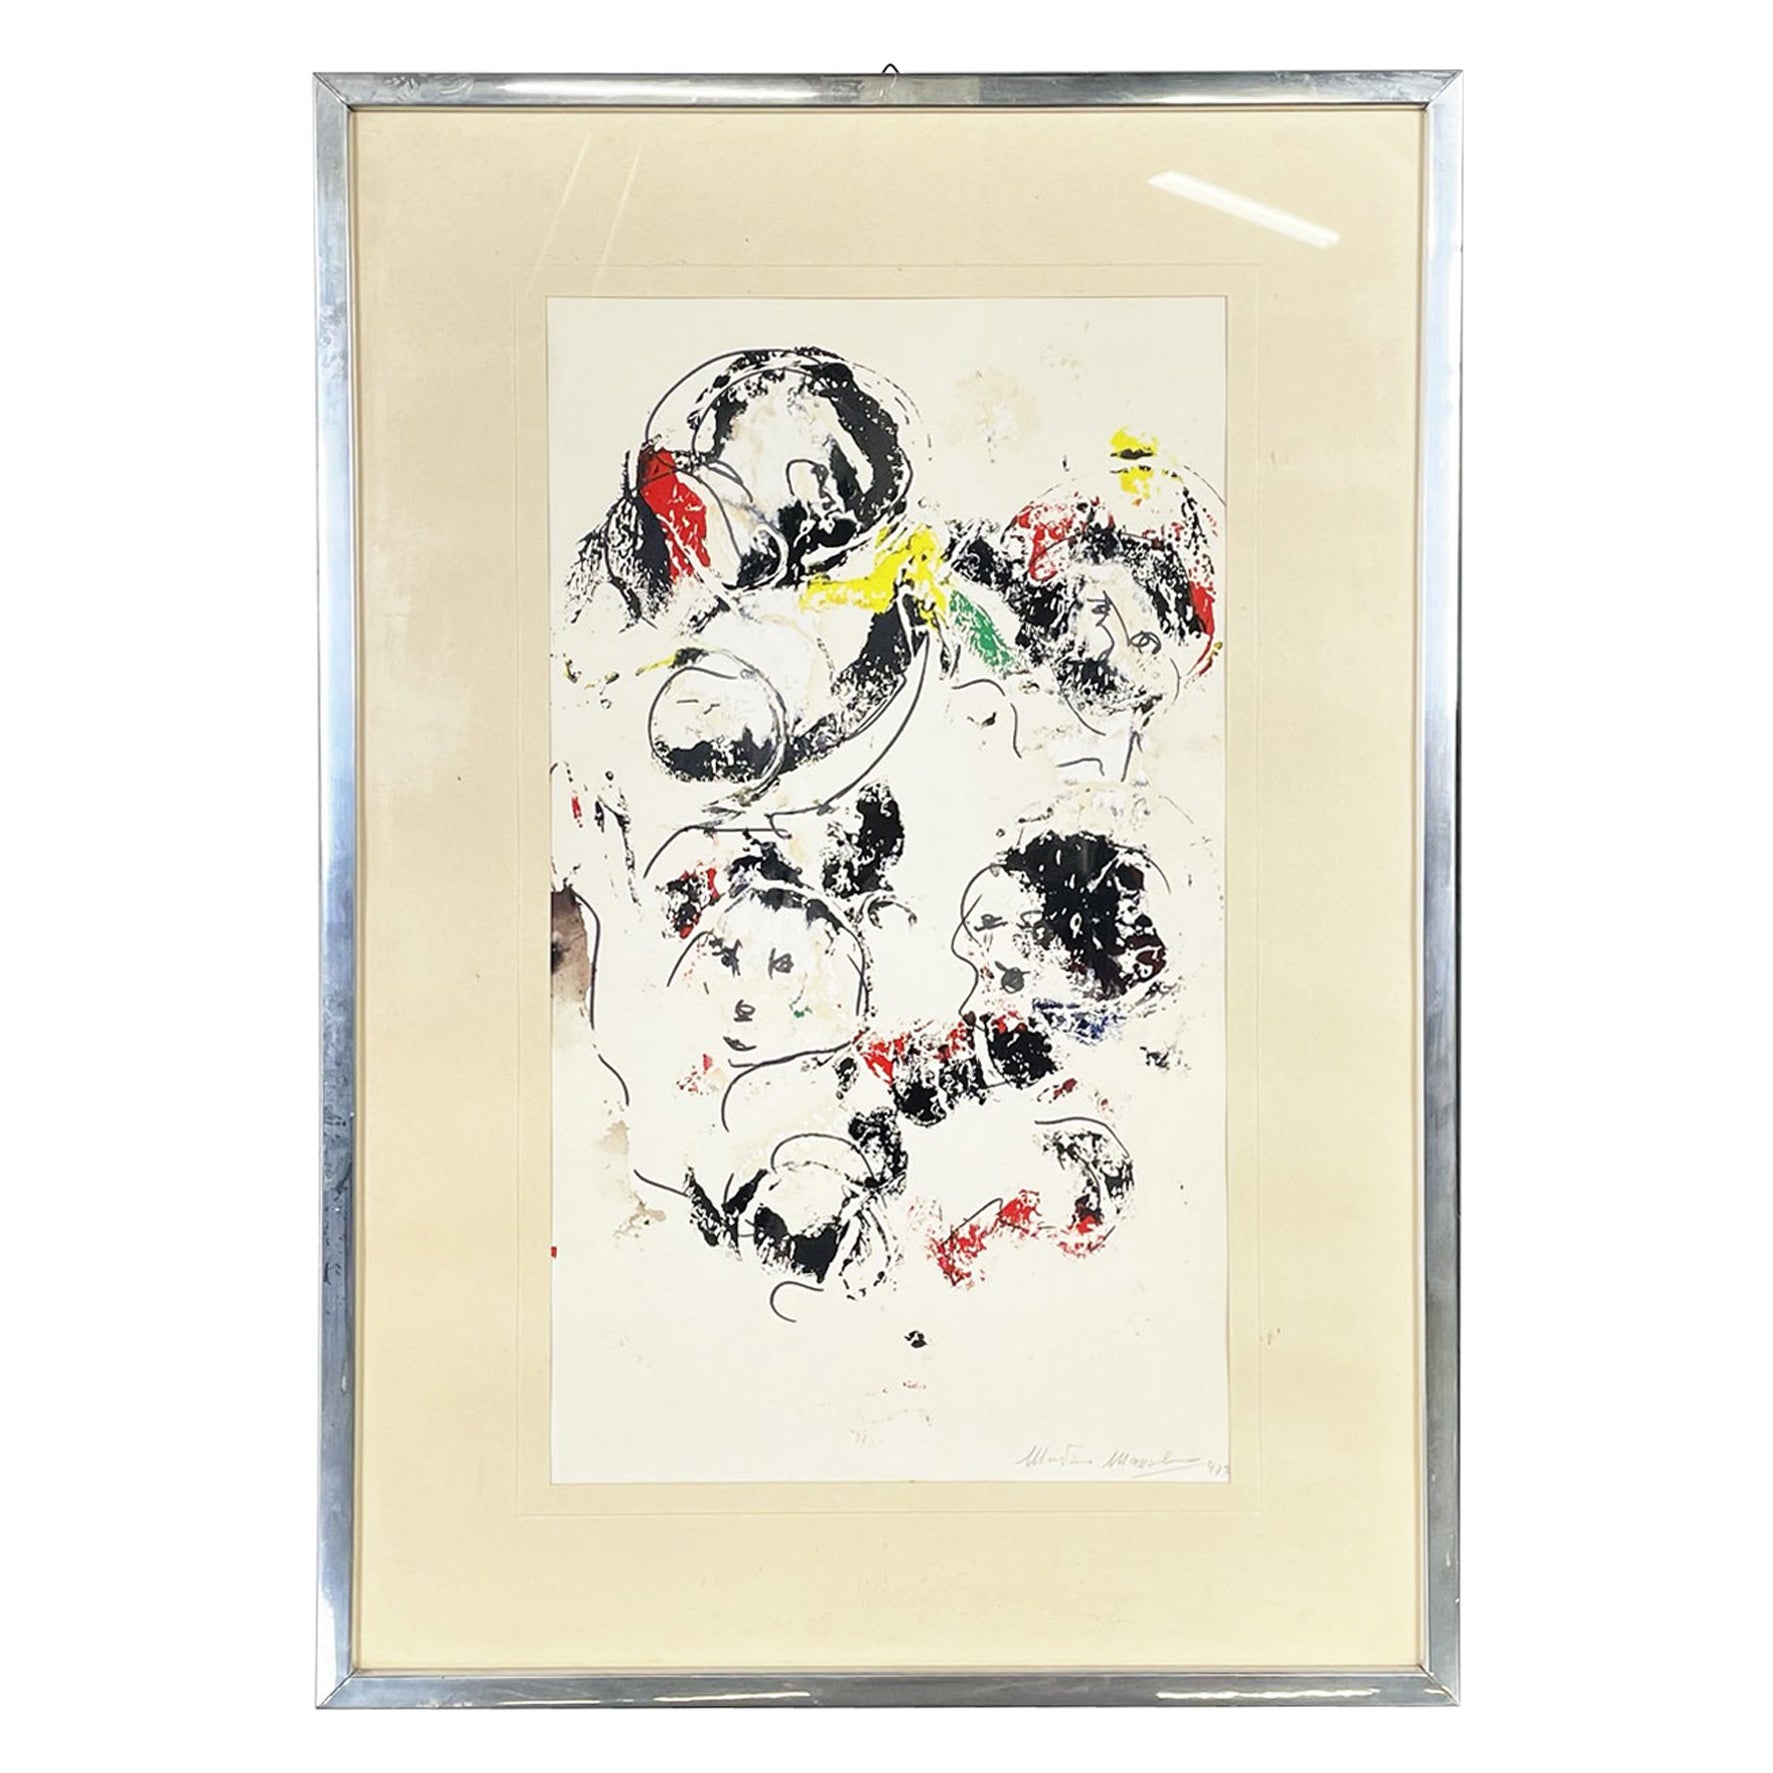 Italian Modern Abstract Mixed Media Painting on Paper and Metal Frame, 1972 For Sale